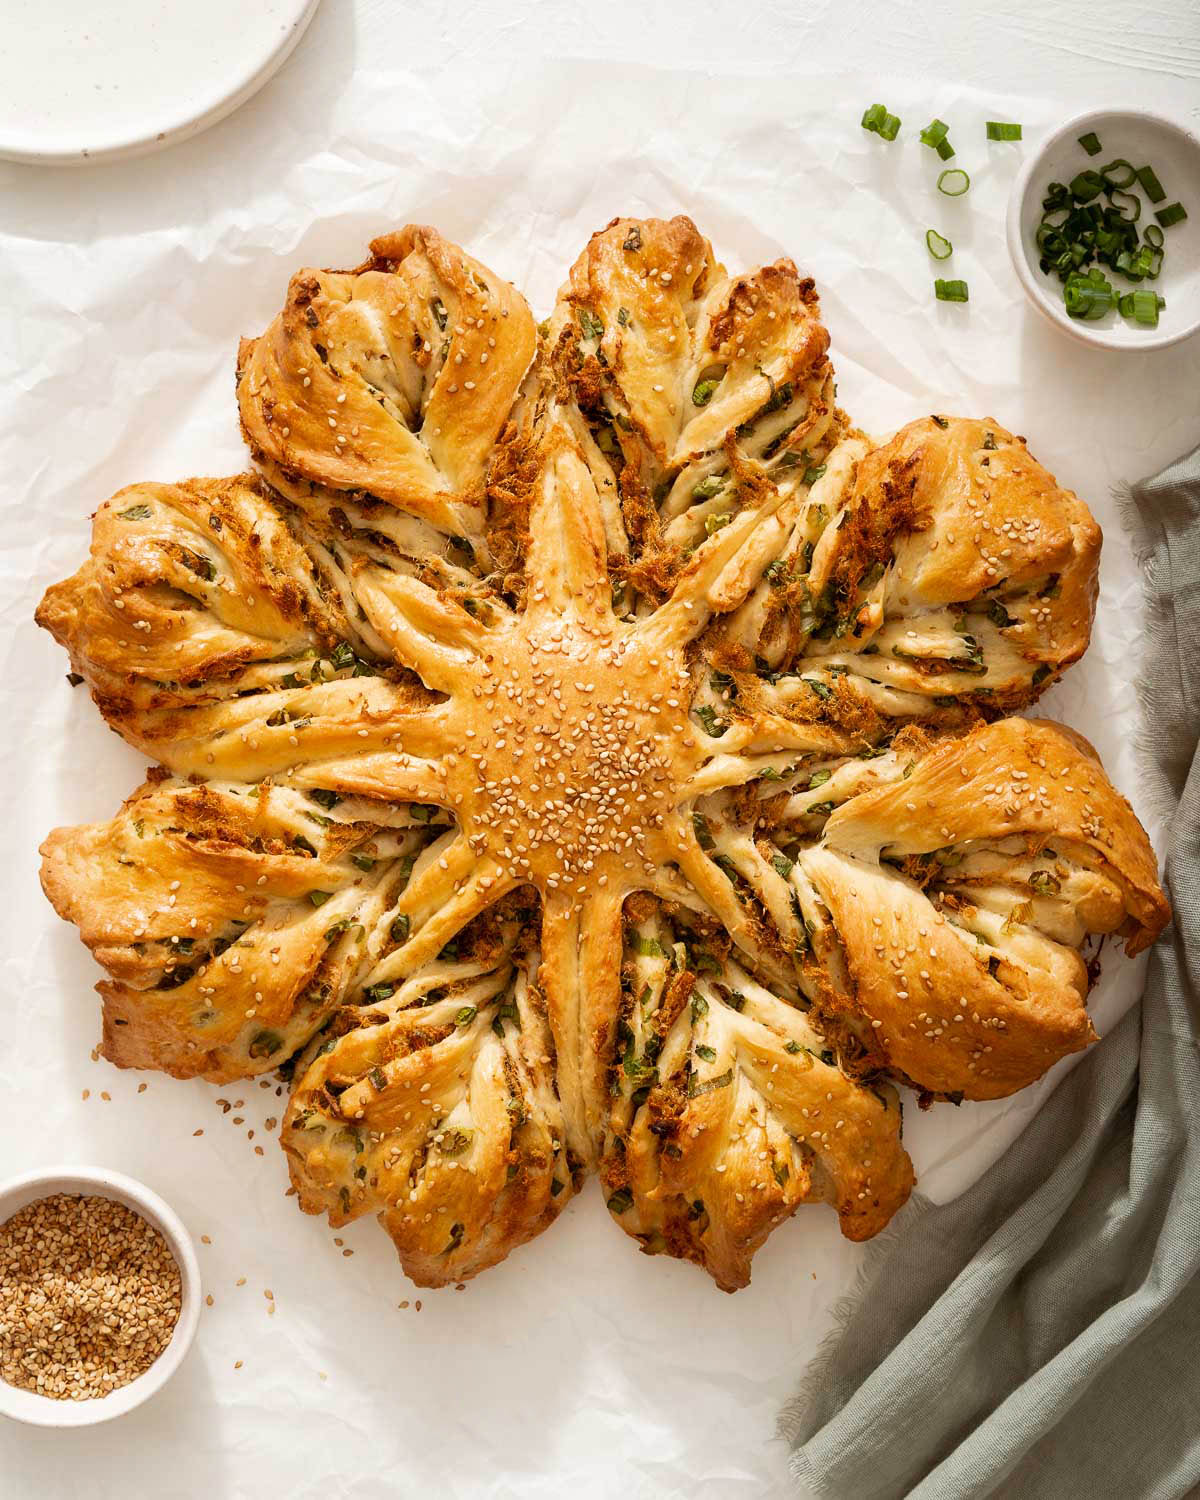 An overhead view of pork floss star bread with scallions.